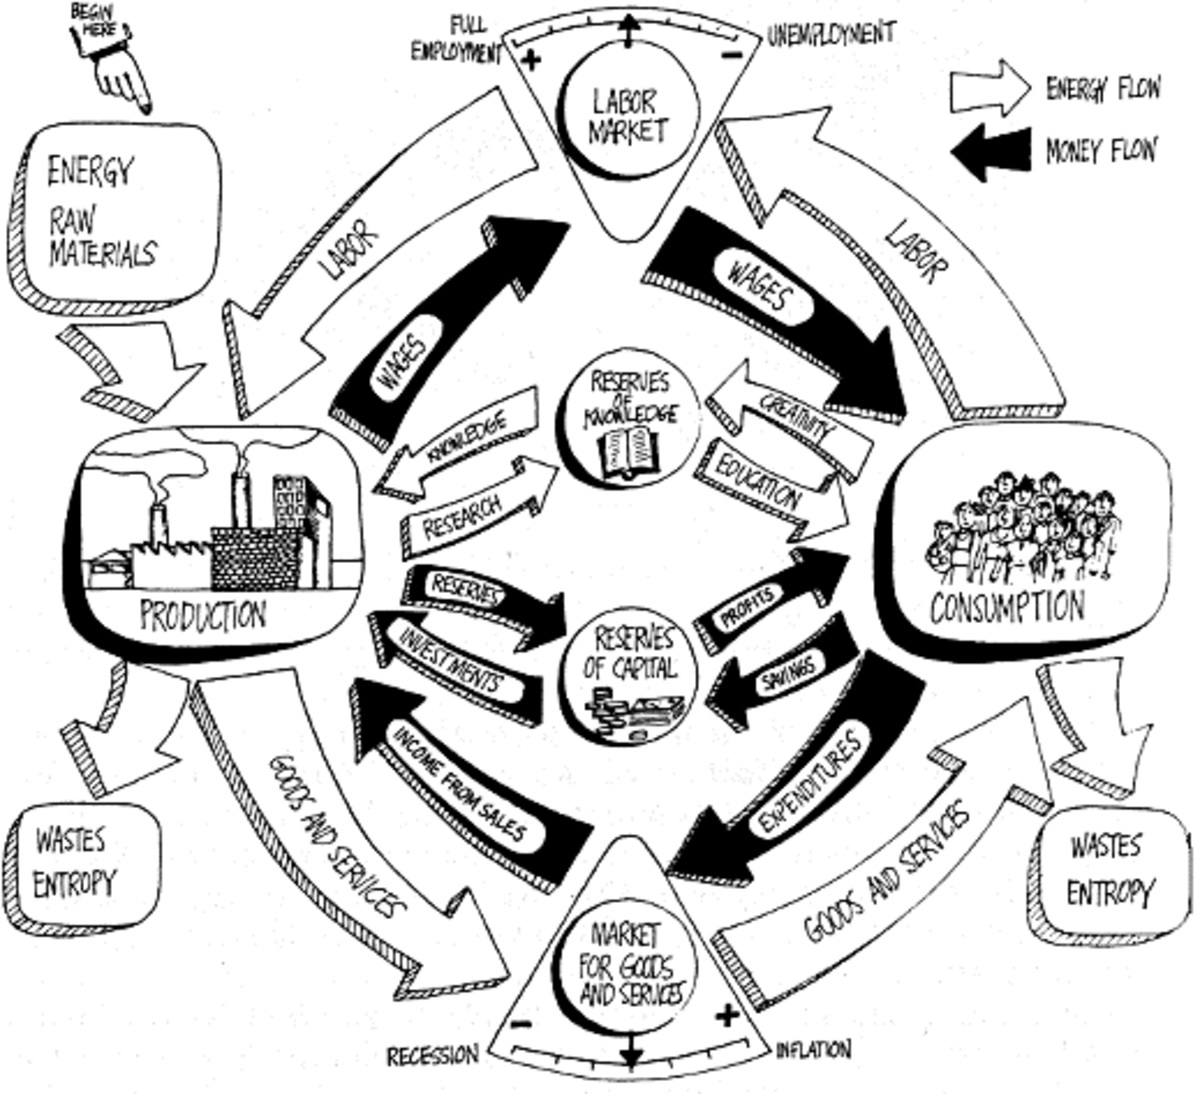 Economic Cycle and Enviroment